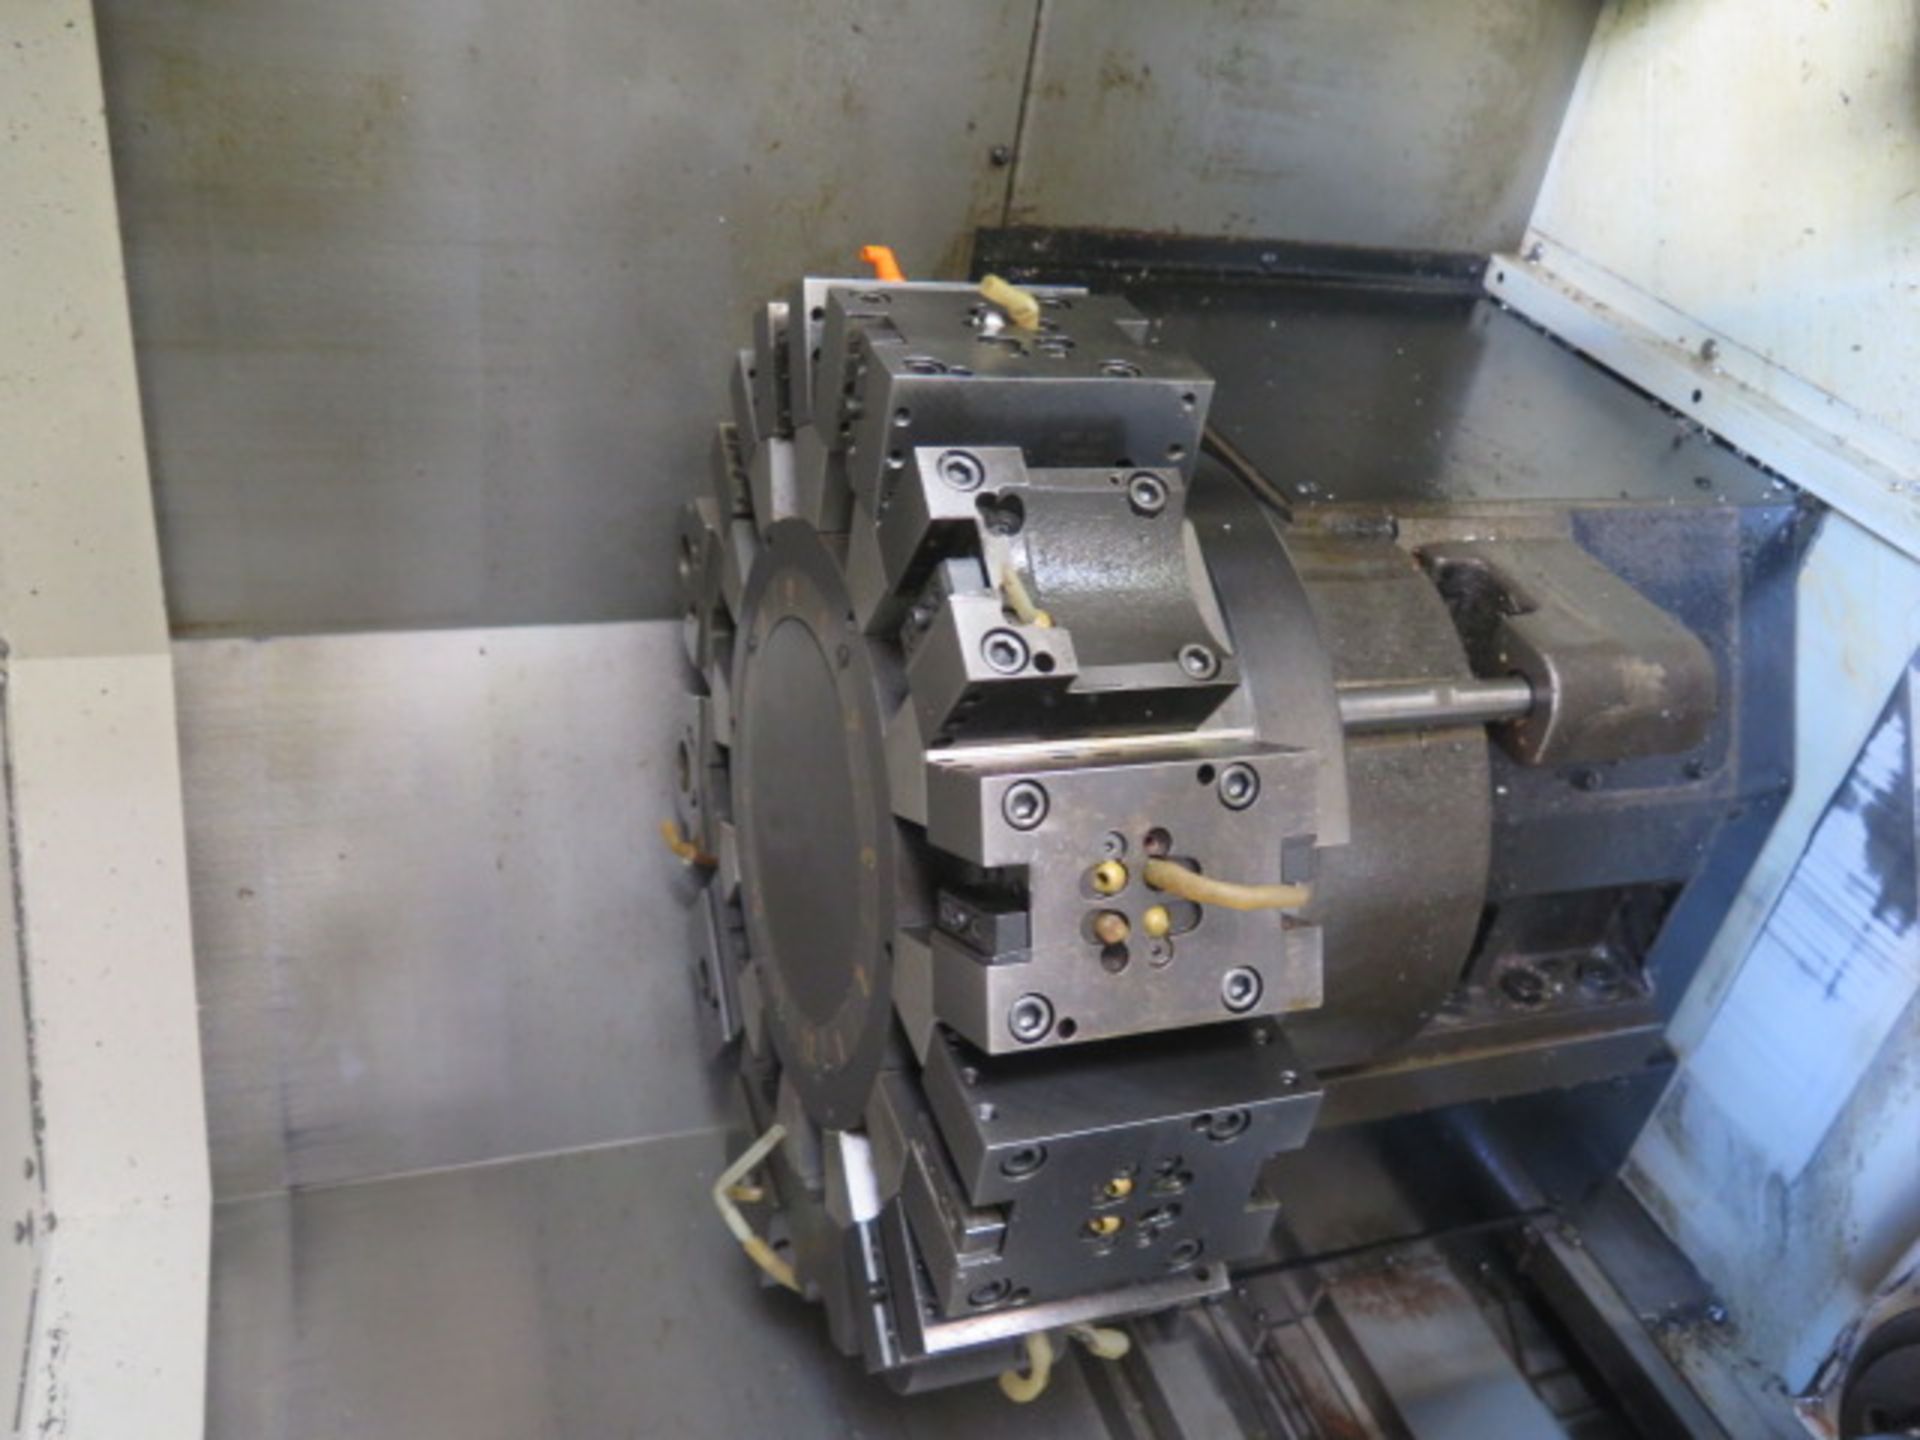 2005 Mori Seiki NL1500 S/500 Twin Spindle CNC Turning Center s/n NL151E01356, SOLD AS IS - Image 7 of 17